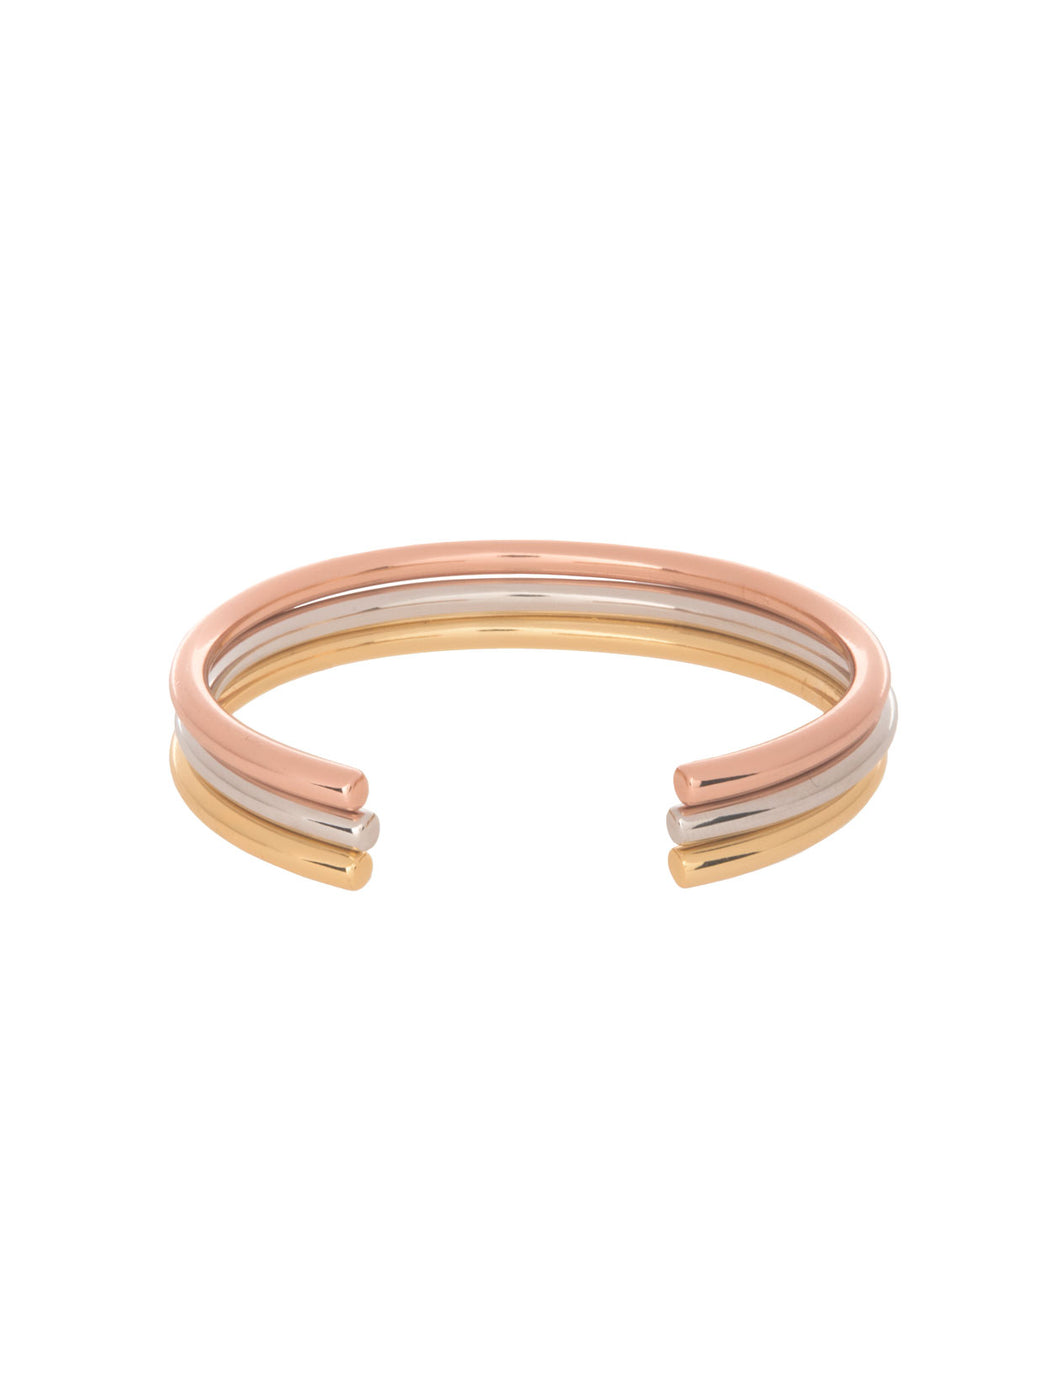 Stackable Cuffs | Kacey K Jewelry.